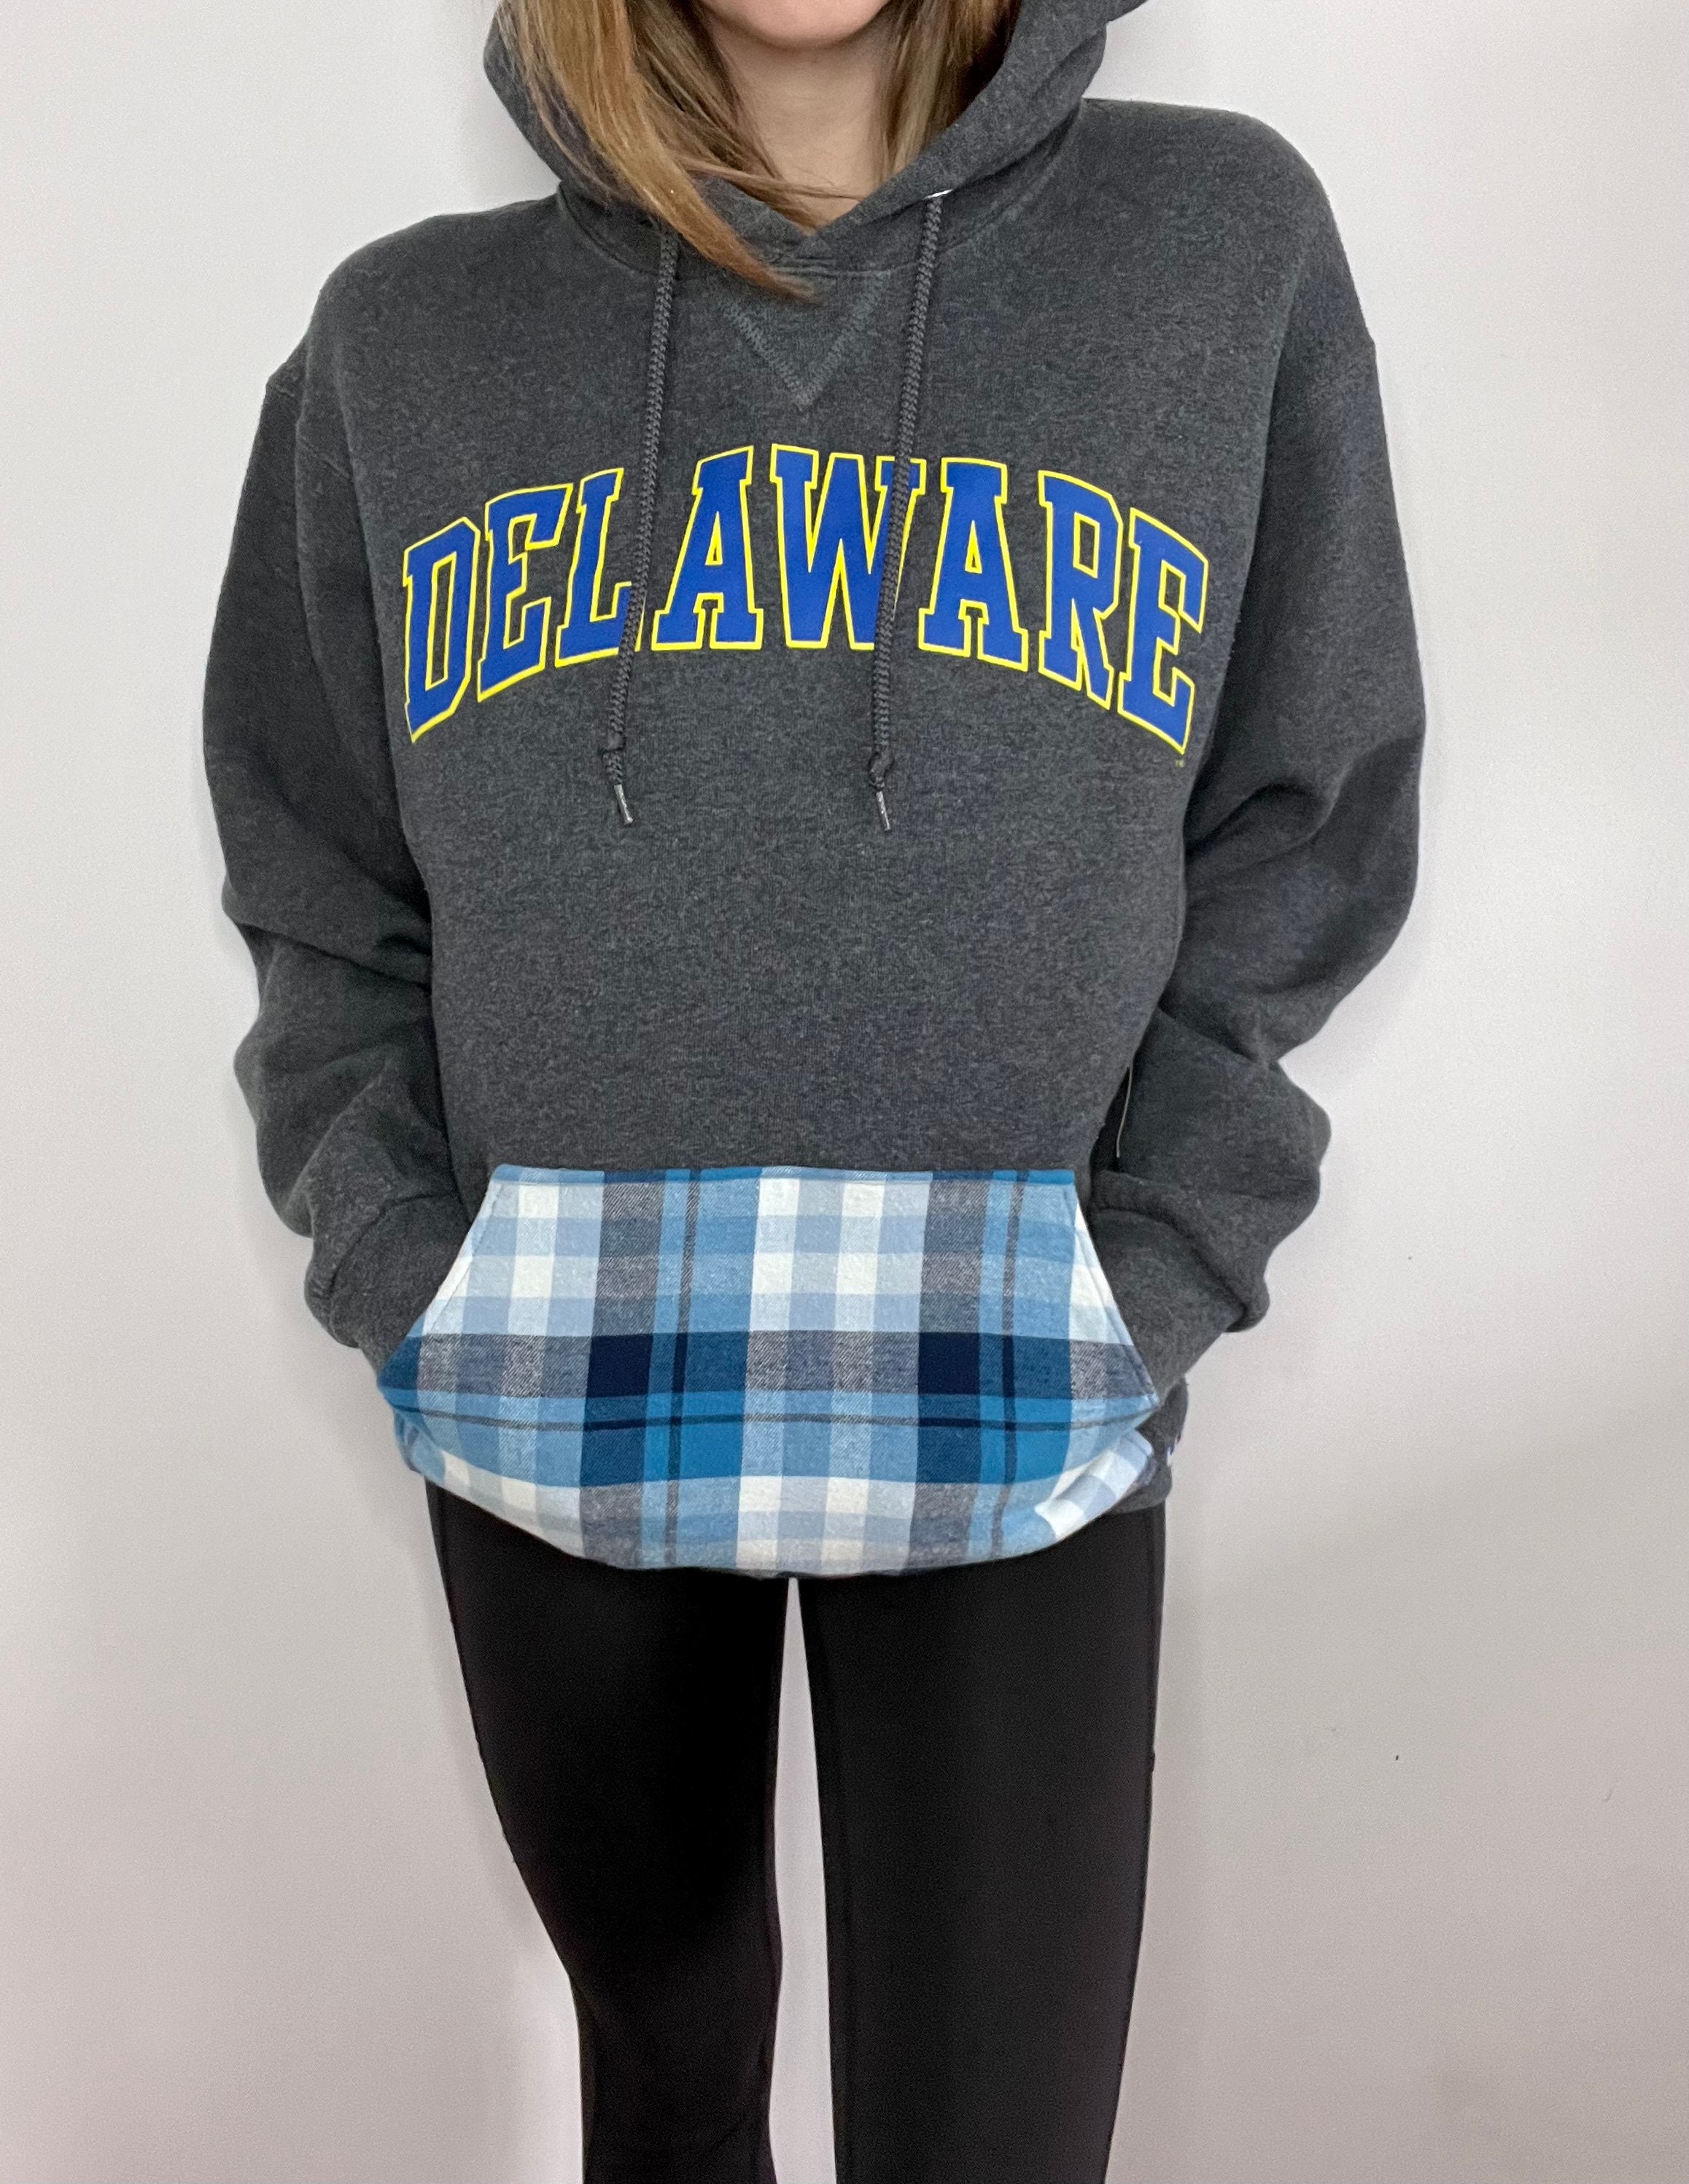 UCLA Bruins logo on upcycled flannel shirt. Custom-made to YOUR size